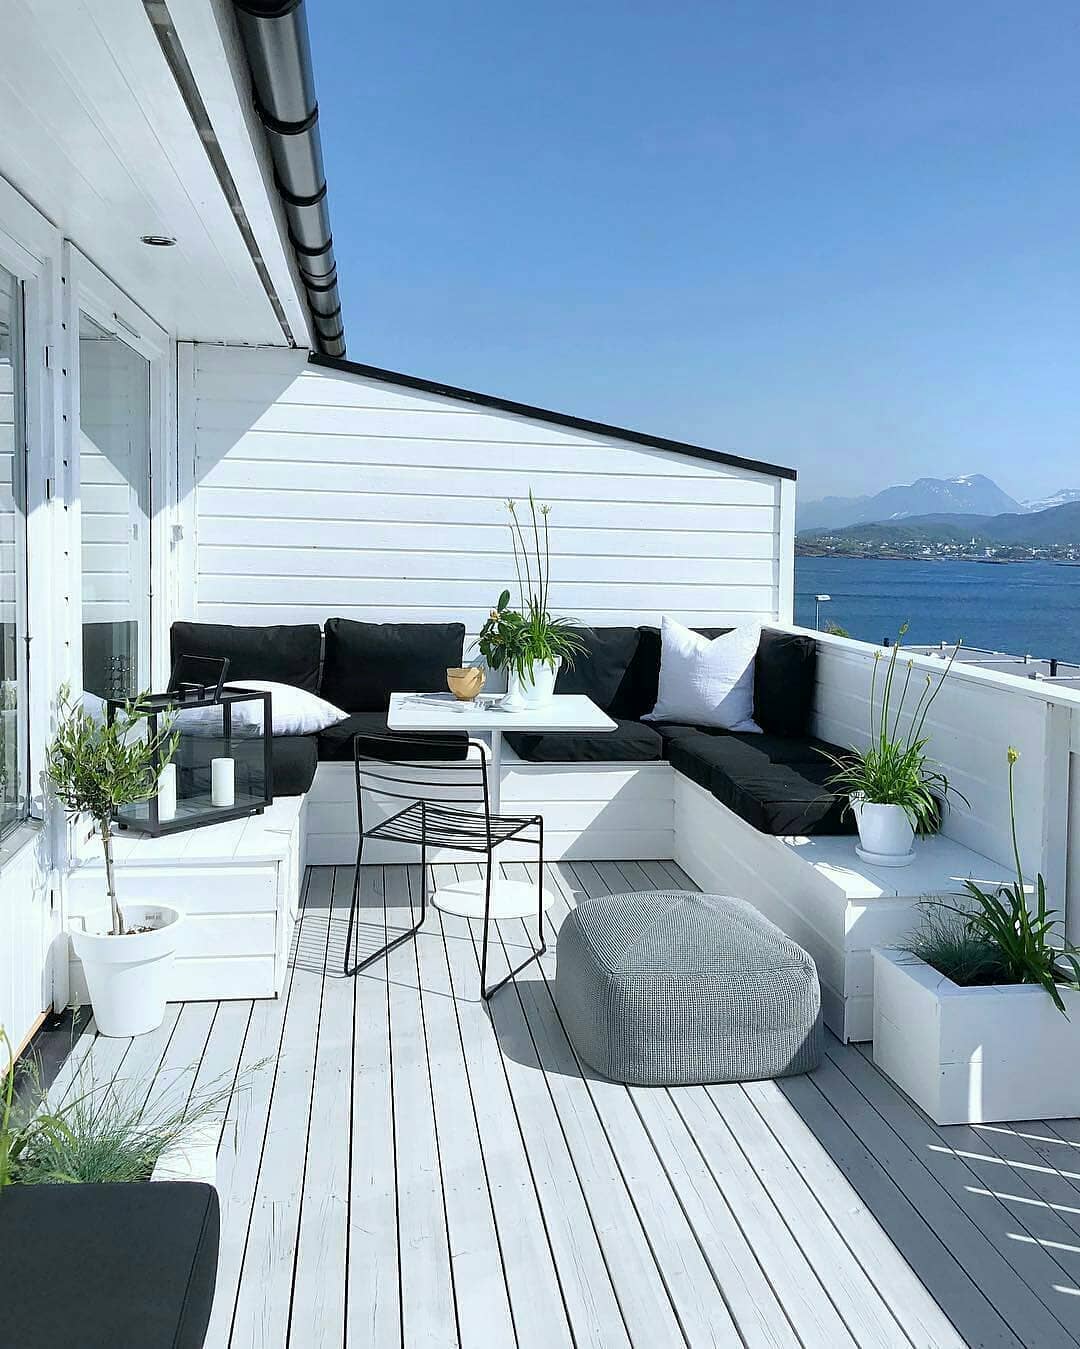 40 Cozy Balcony Ideas and Decor Inspiration 2019 - Page 22 of 41 - My Blog